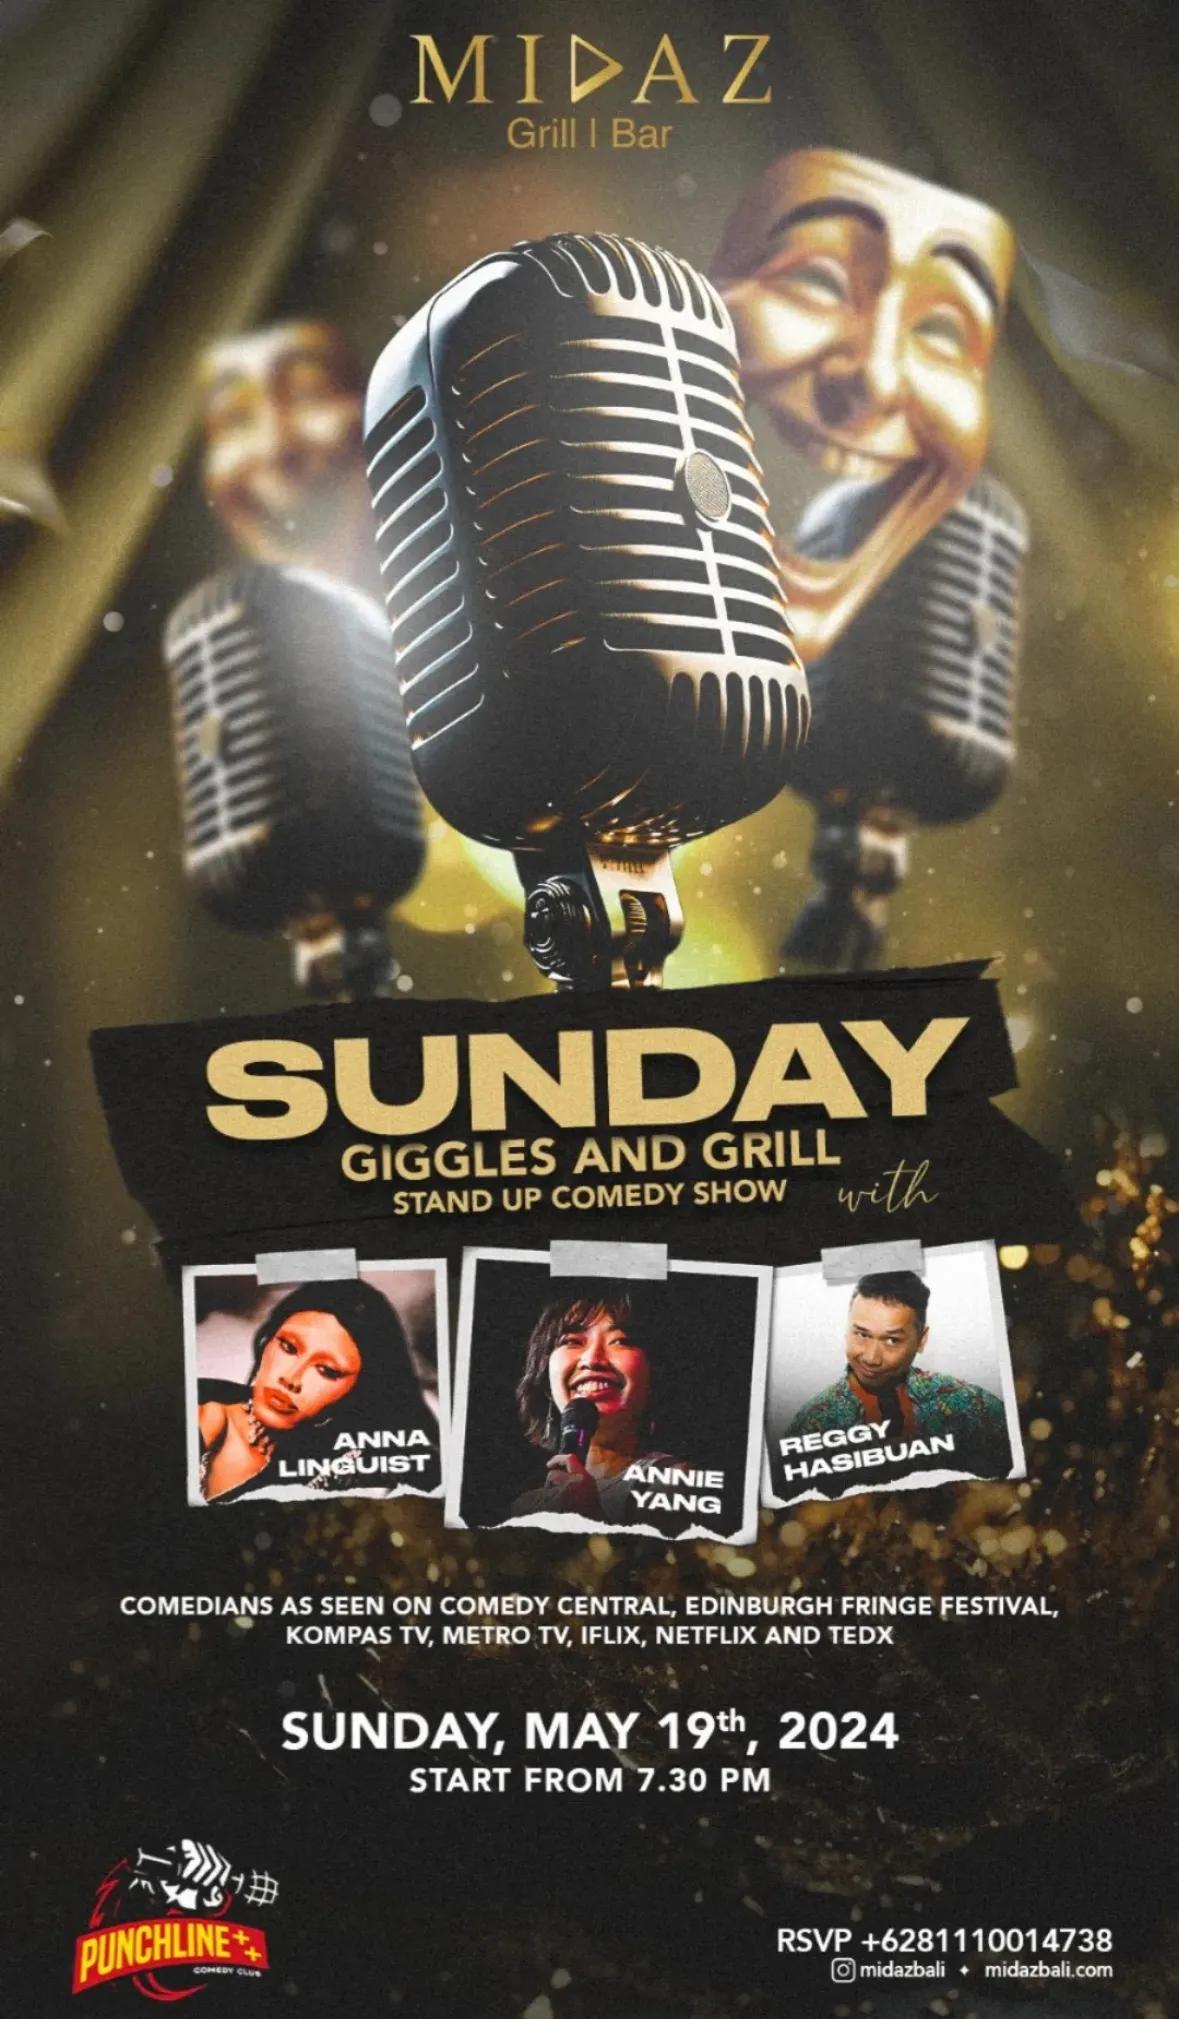 Event at Midaz on May 19 2024: Sunday Giggles and Grill